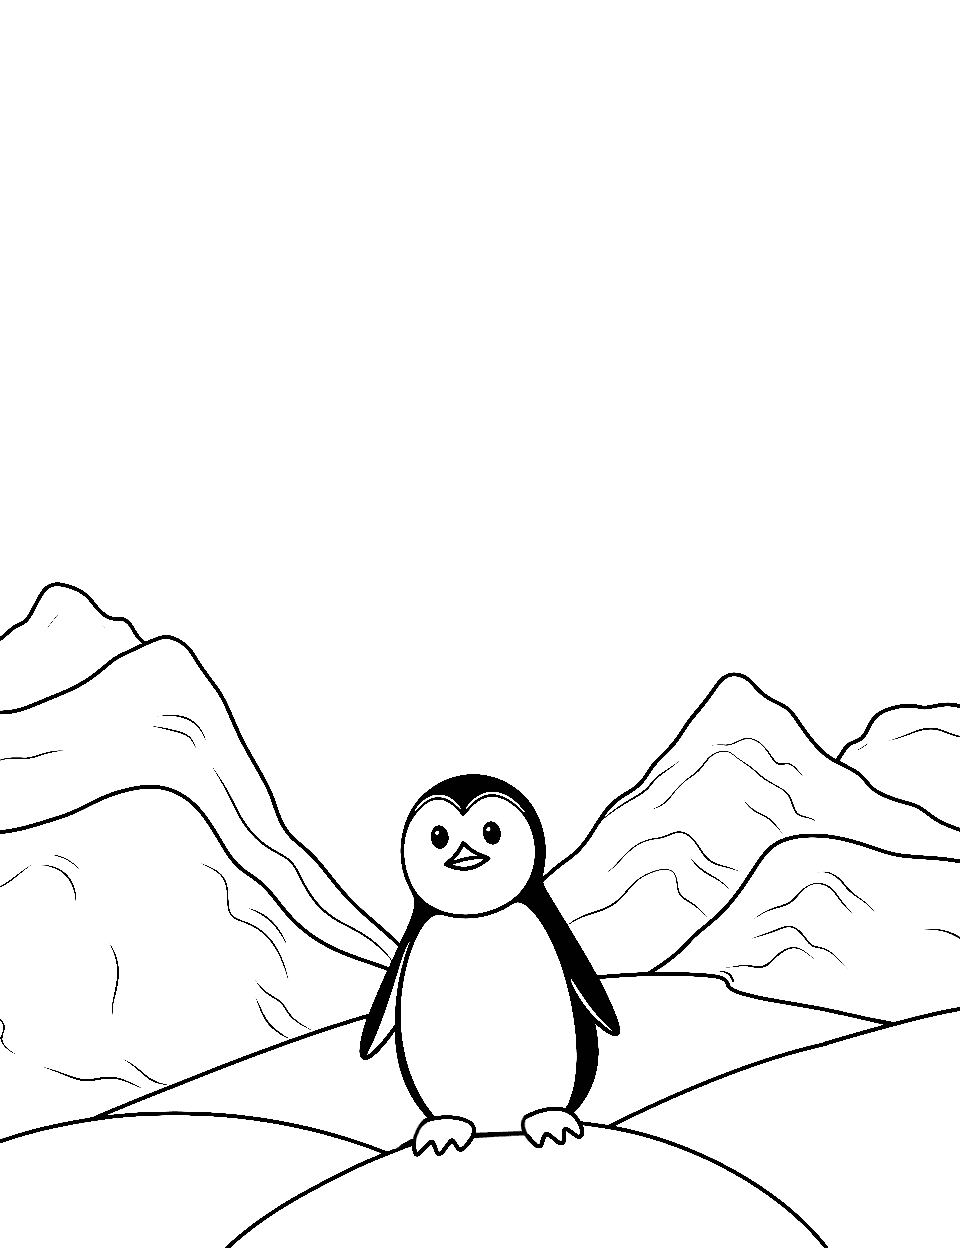 Wintry Penguin Landscape Coloring Page - A penguin on a snowy hill with glee.